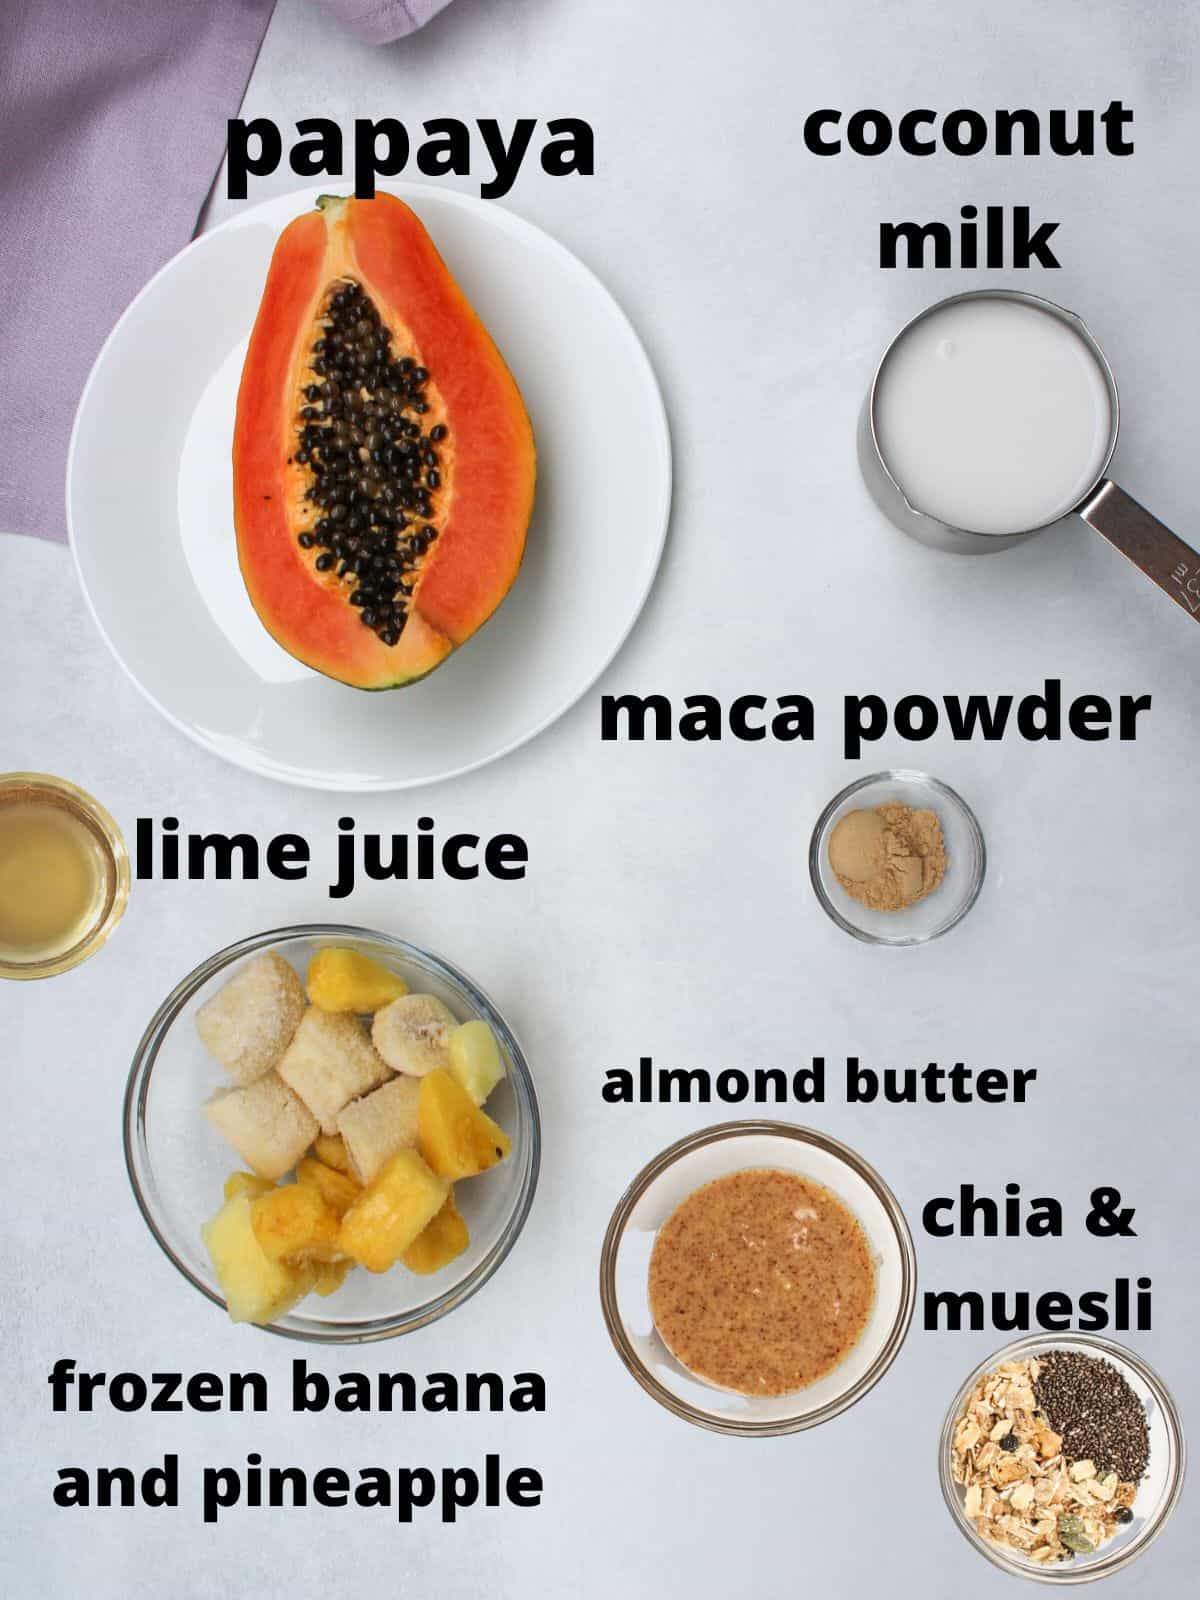 Labeled recipe ingredients on a white background. From top to bottom: half of the fresh papaya with seeds, coconut milk, lime juice, maca powder, frozen bananas, almond butter, chia seeds and muesli.